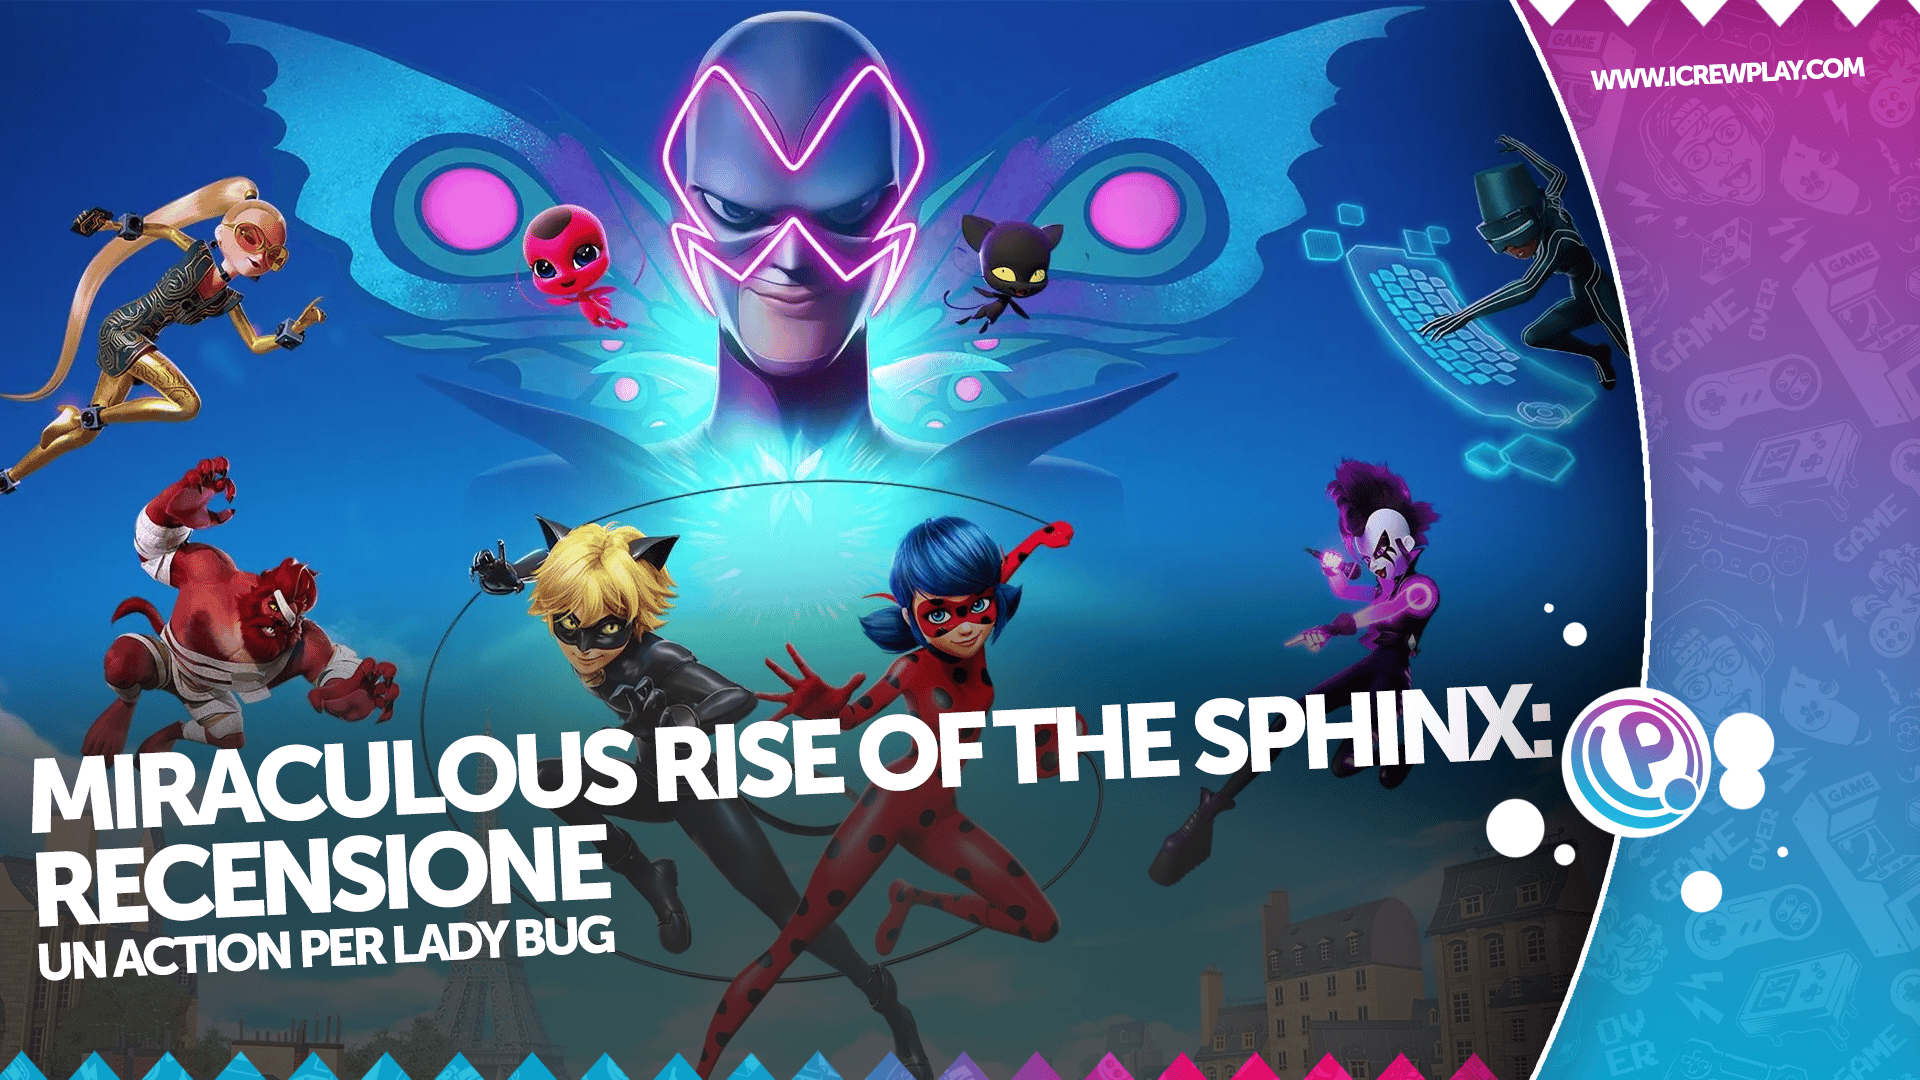 Miraculous rise of the sphinx: recensione per PlayStation 4 2